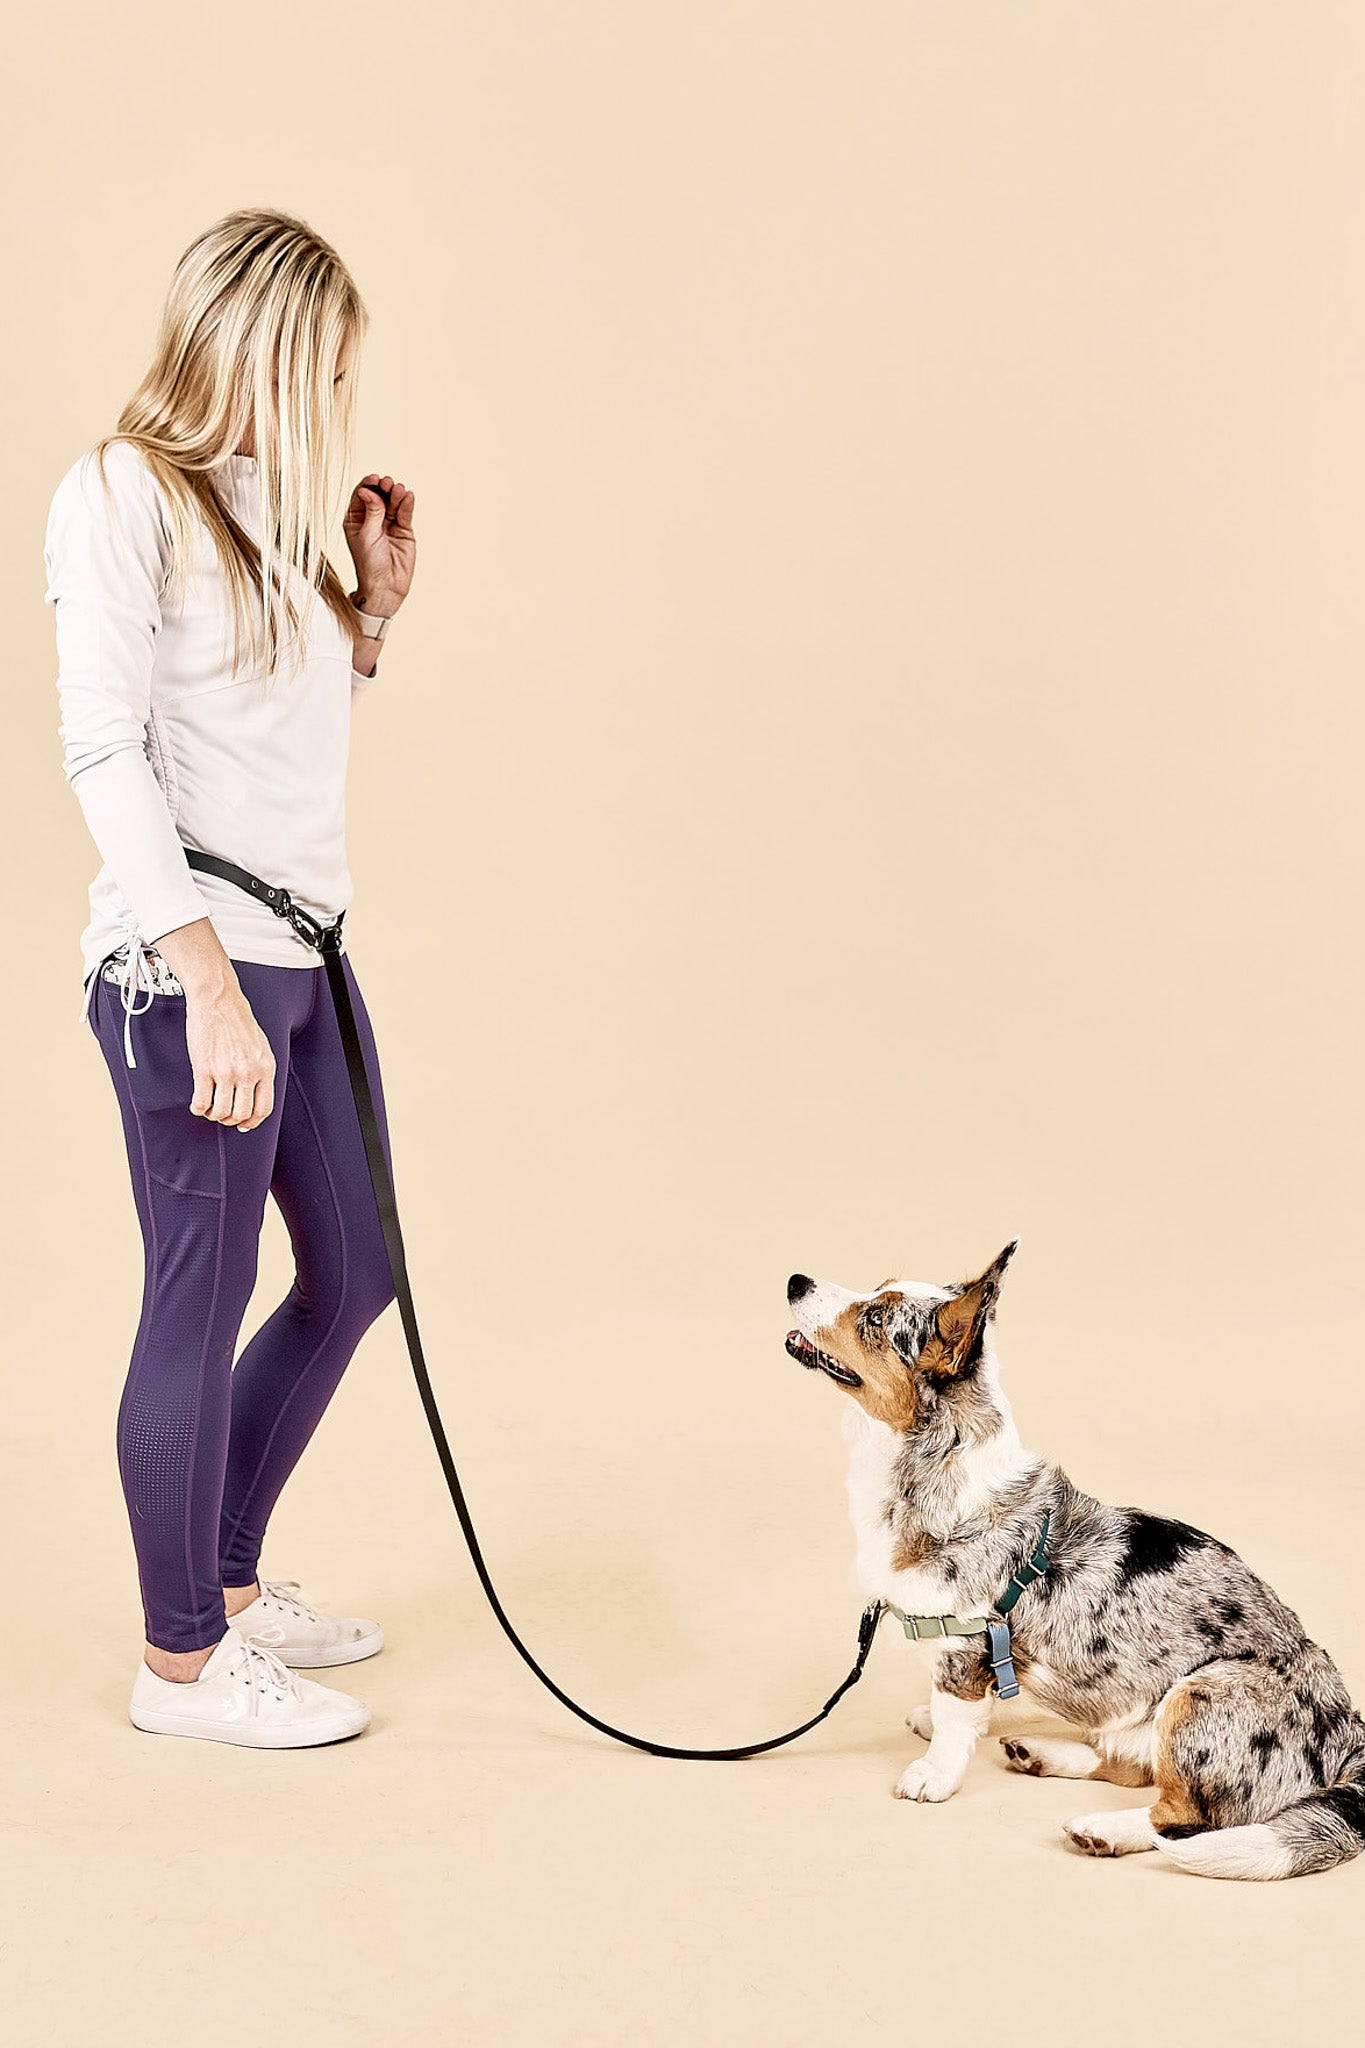 No Pull Quick Release Harness and Convertible Hands-Free Leash